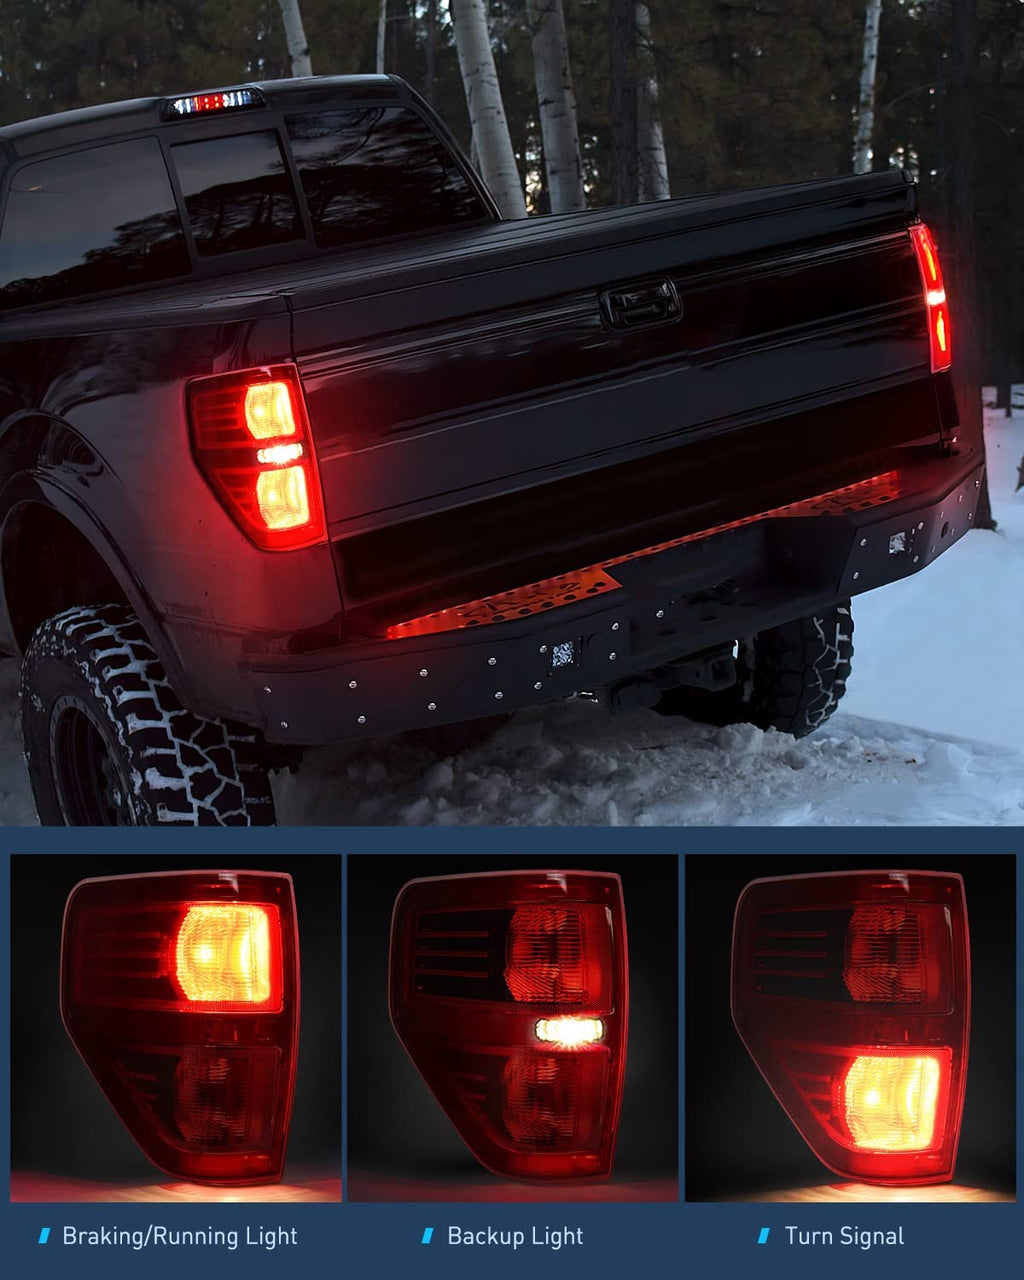 Trailer Light Nilight Driver Side Taillight Assembly for 2009 2010 2011 2012 2013 2014 Ford F-F150 F150 Pickup Truck Right Side Taillight Rear Lamp Replacement OE Style Red Housing Tail lamp, 2 Year Warranty